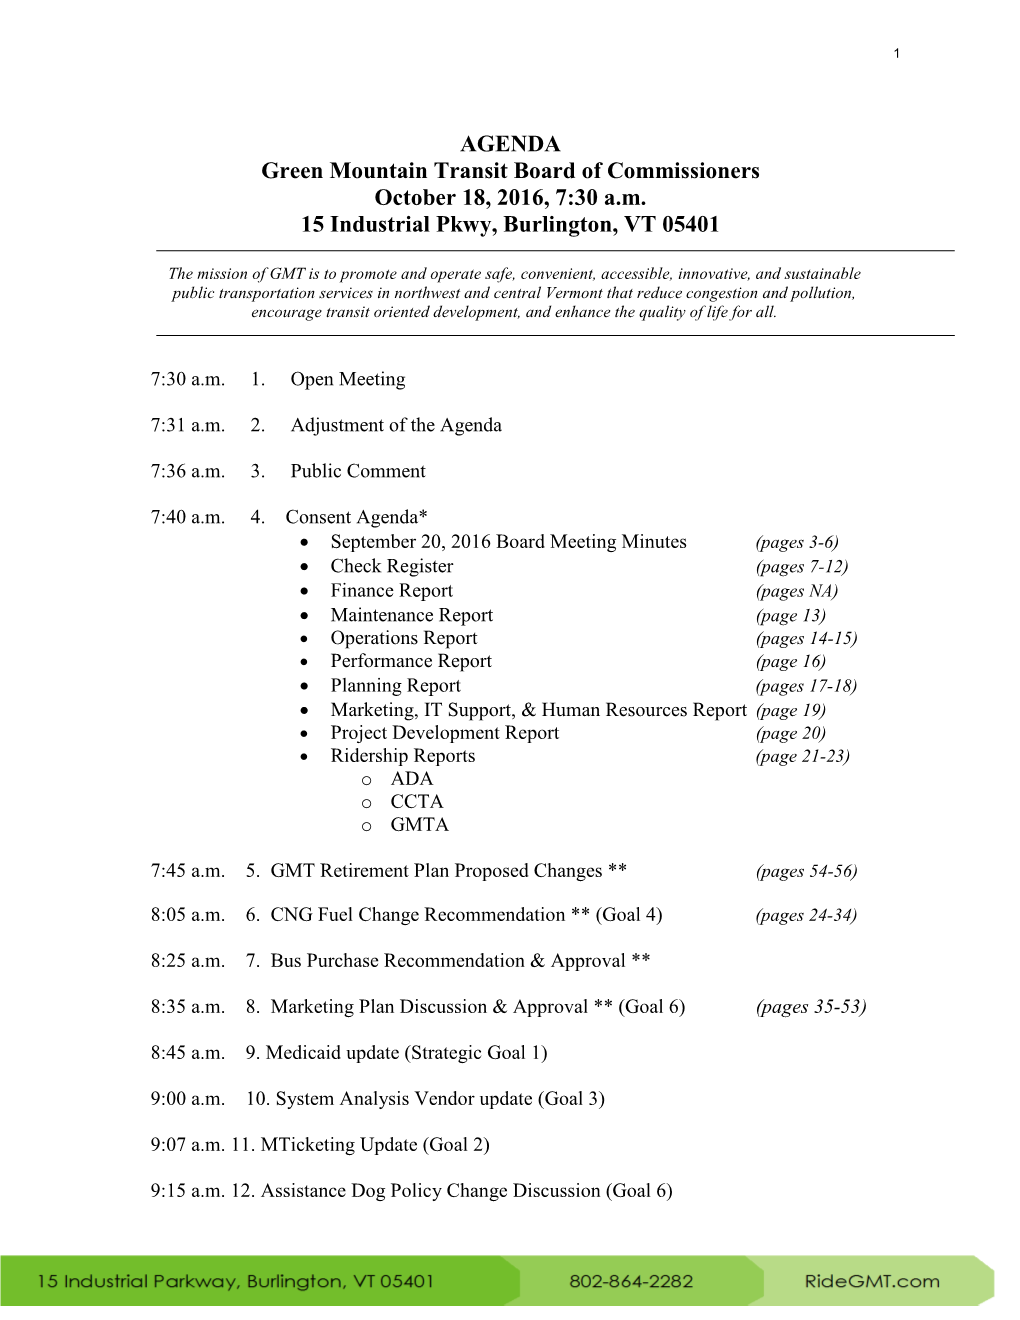 AGENDA Green Mountain Transit Board of Commissioners October 18, 2016, 7:30 A.M